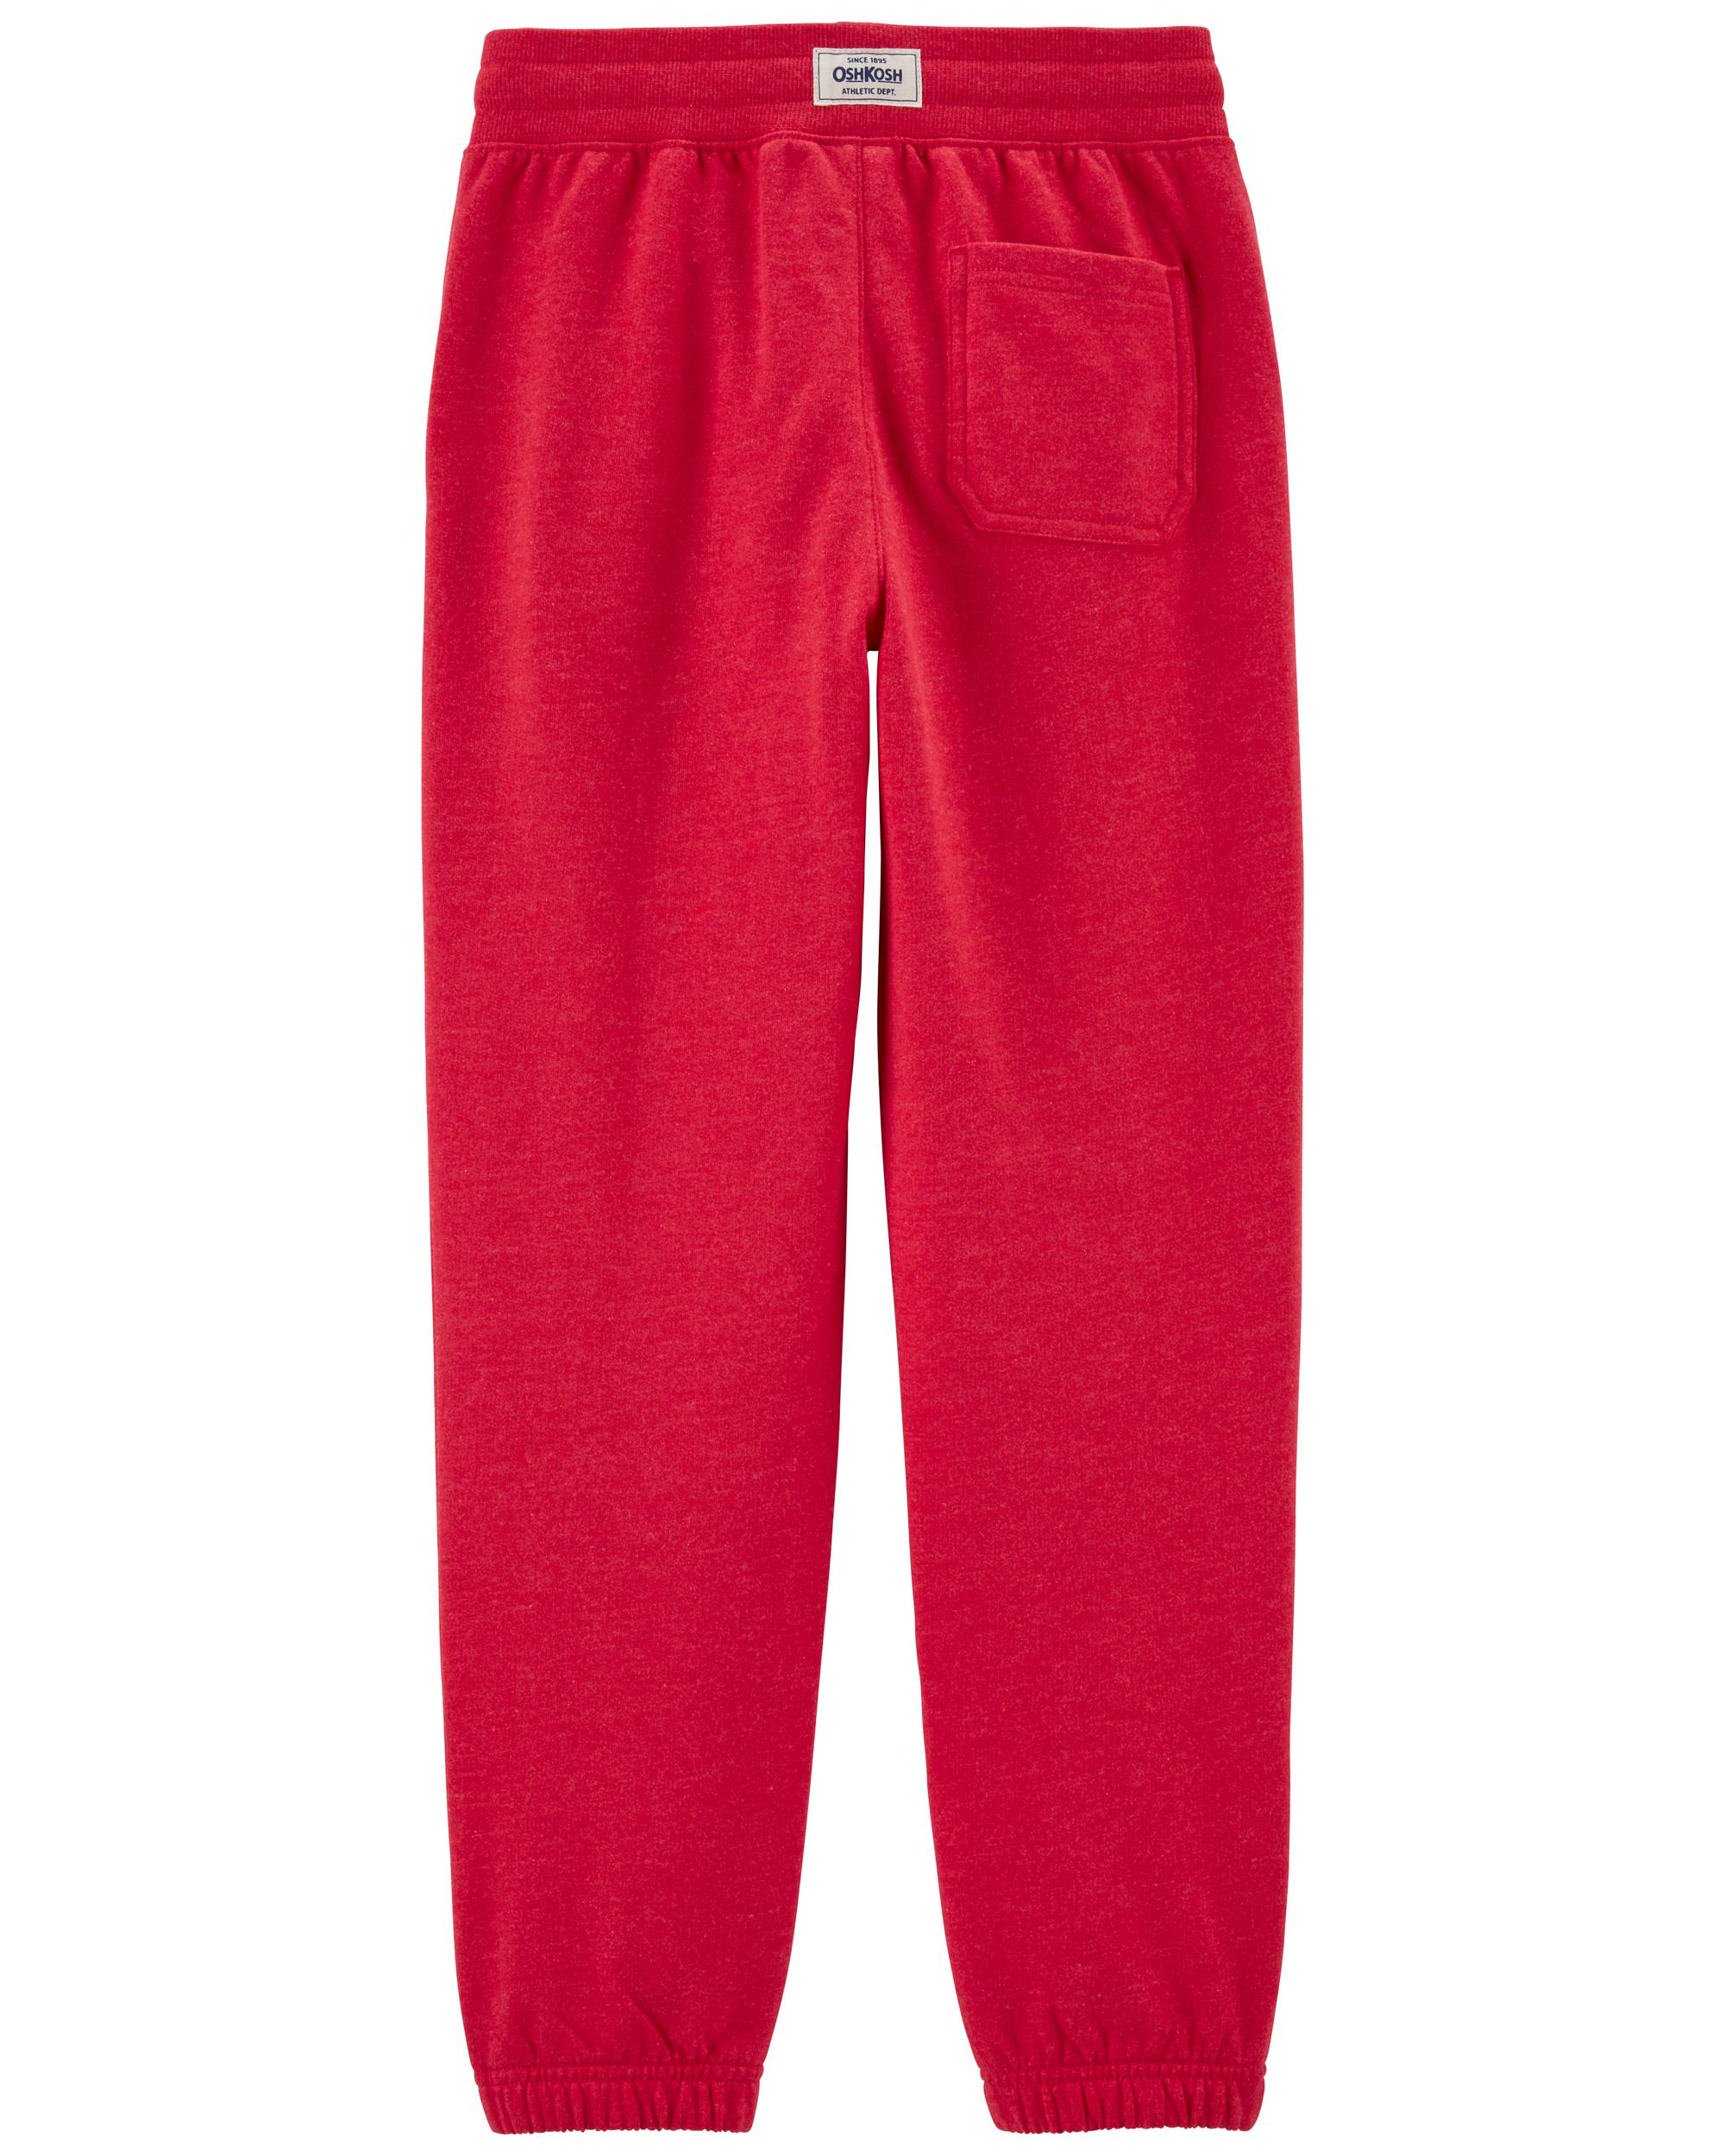 NVGTN Ruby Red Jogger Sweatpants  Red joggers, Jogger sweatpants,  Sweatpants